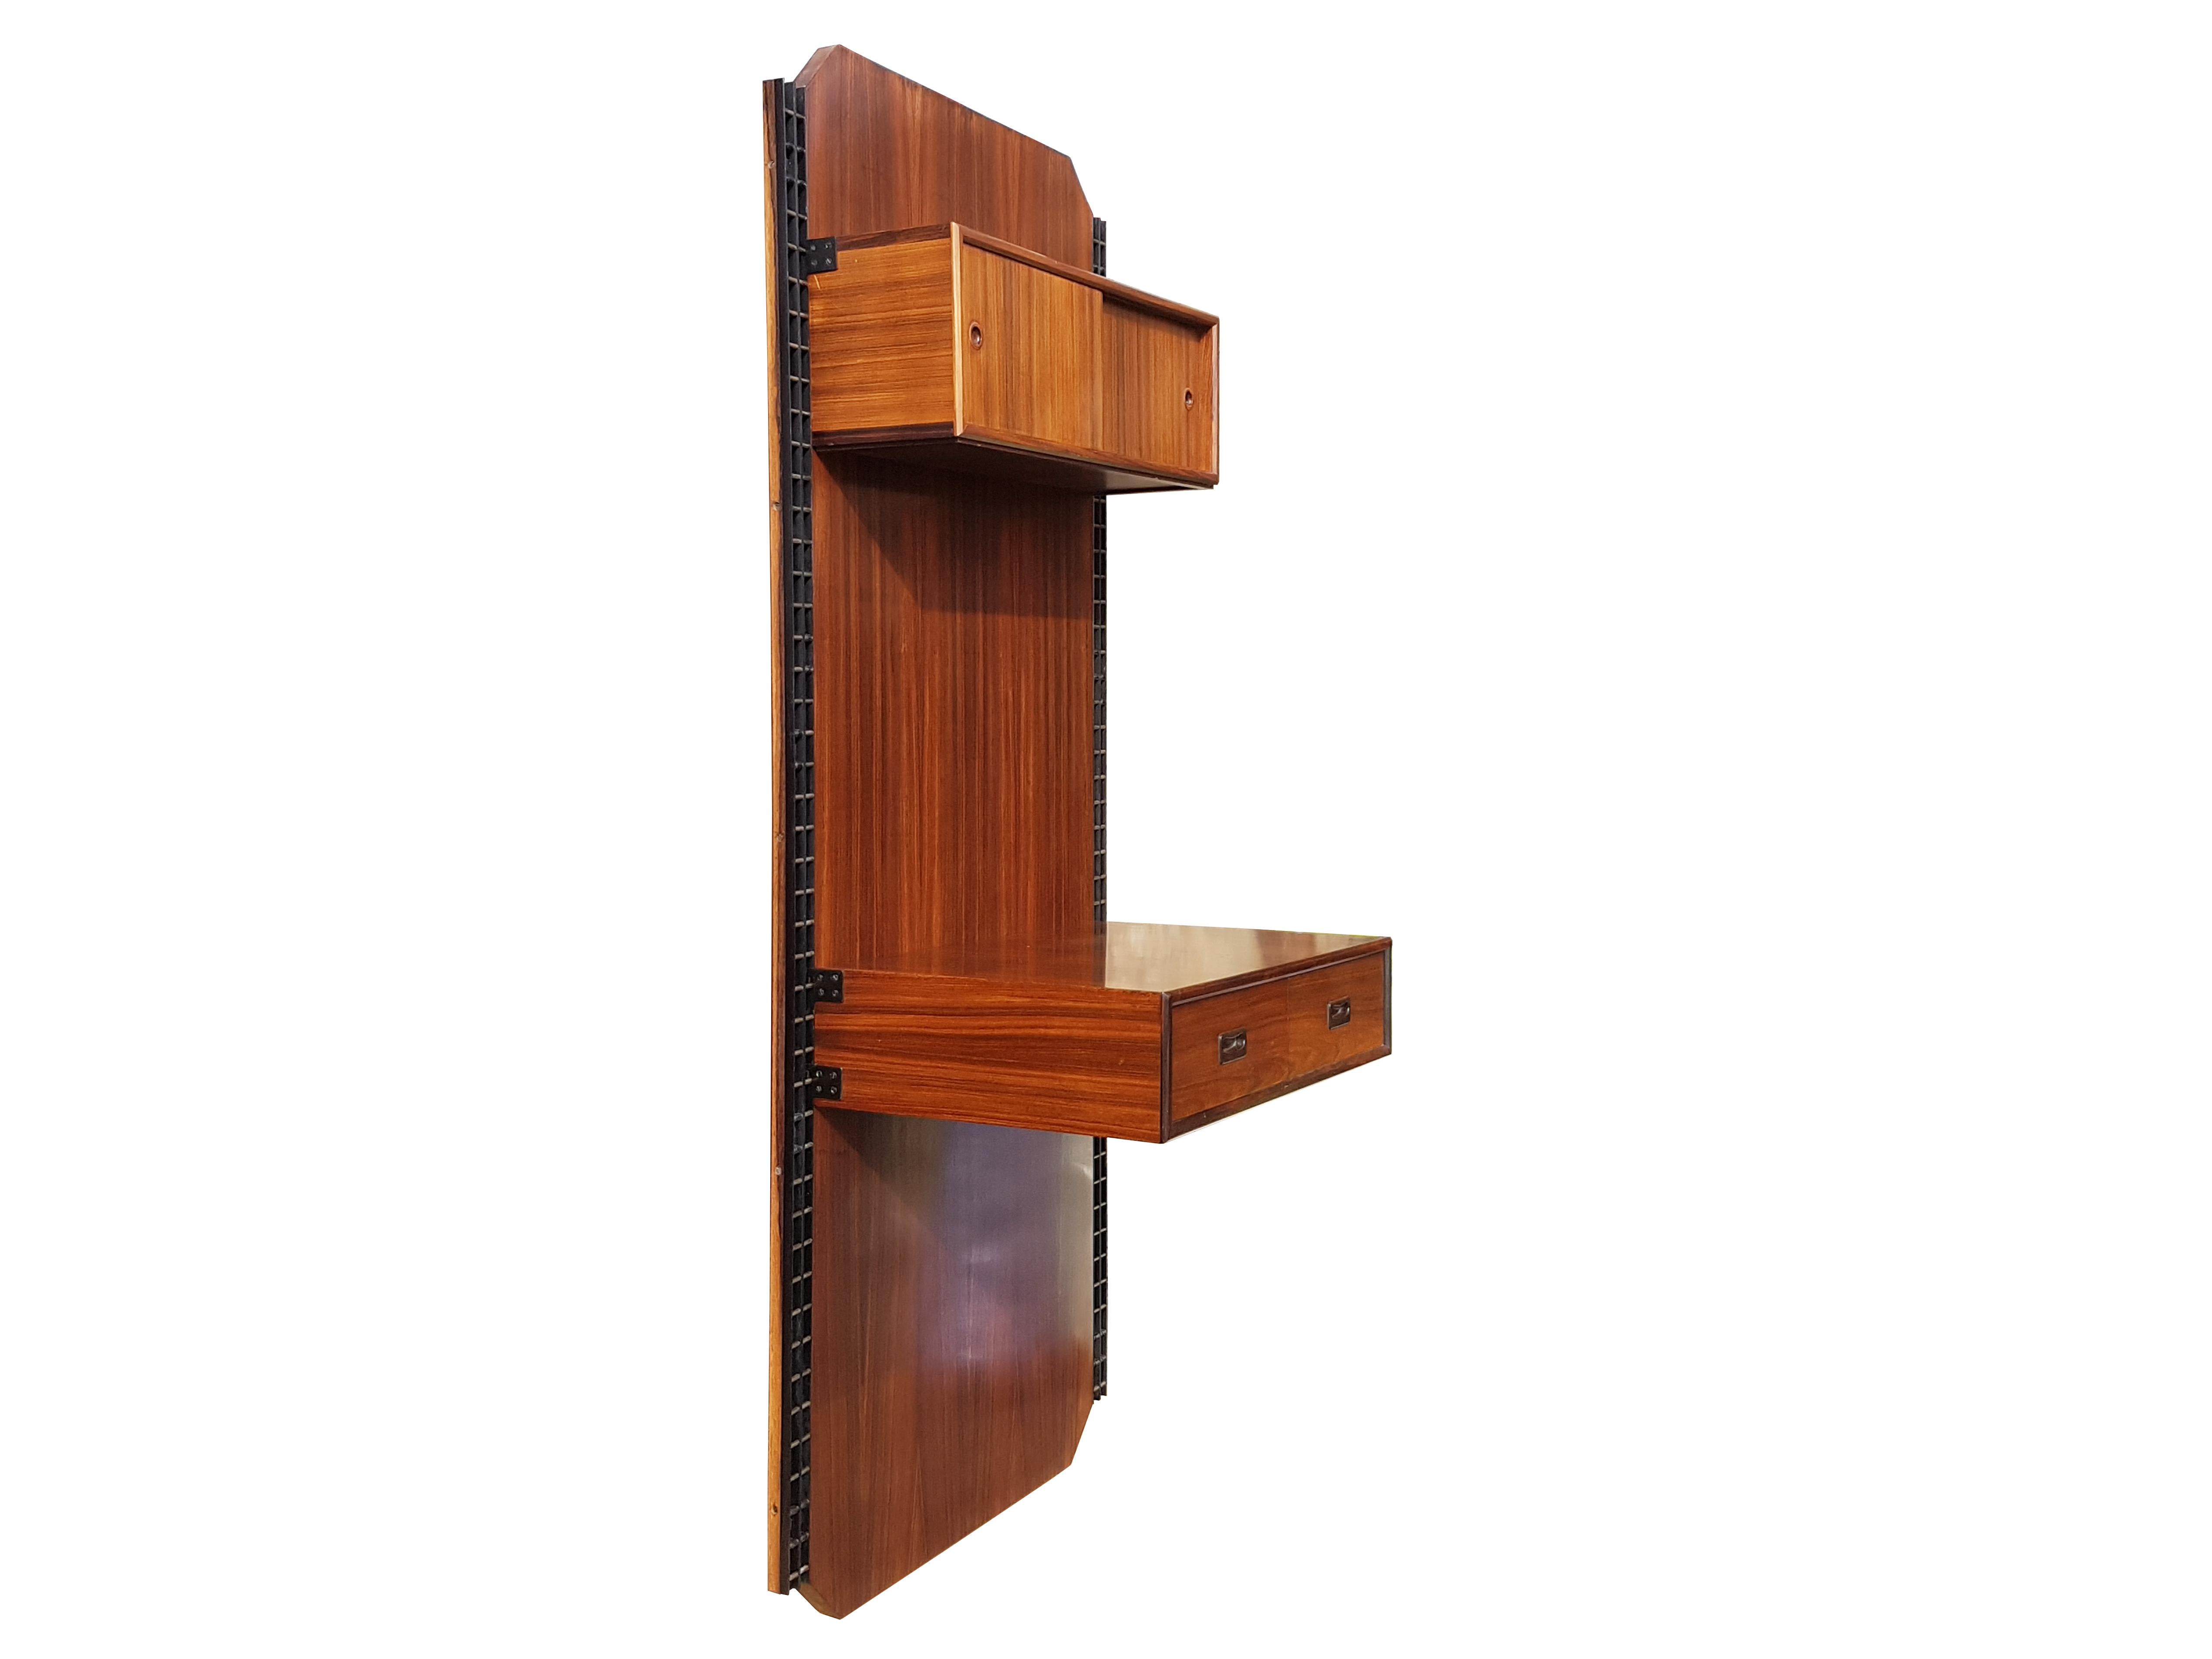 This bookcase was produced in Italy around the 1960s. It consists of a wall panel with 2 adjustable containers and 1 desk

The panel is equipped with side racks that allow the container elements to be hooked to the desired height. All elements are